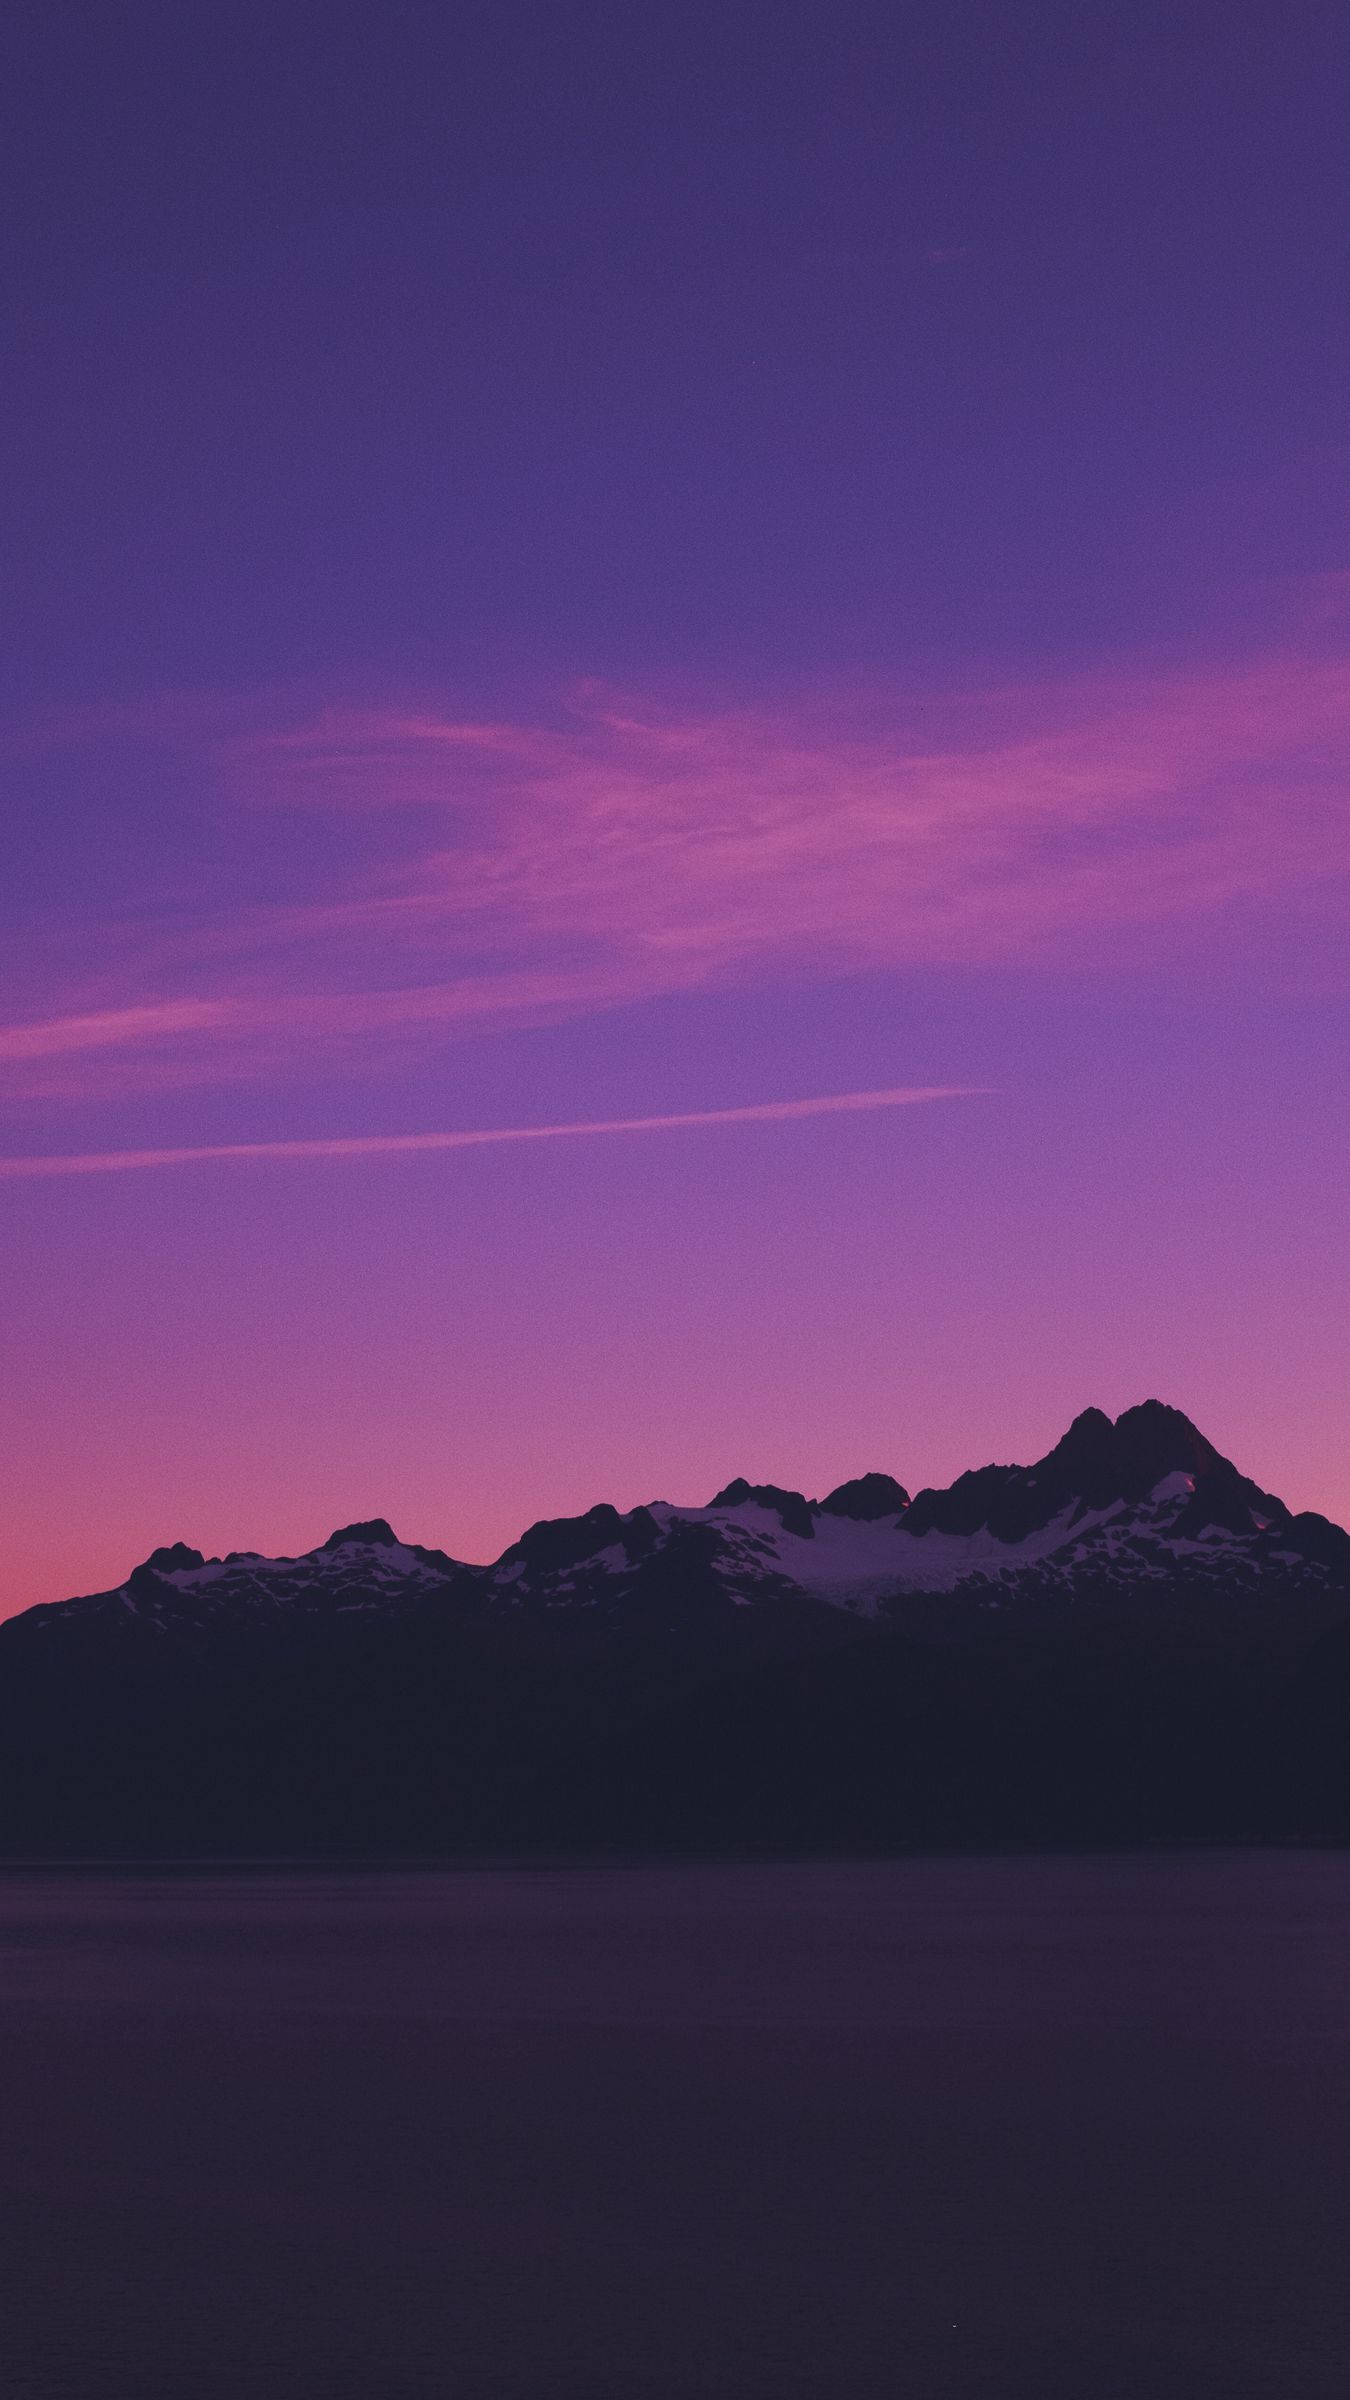 Download wallpaper 1350x2400 mountains, sky, evening, twilight, purple, alaska iphone 8+/7+/6s+/for parallax HD background